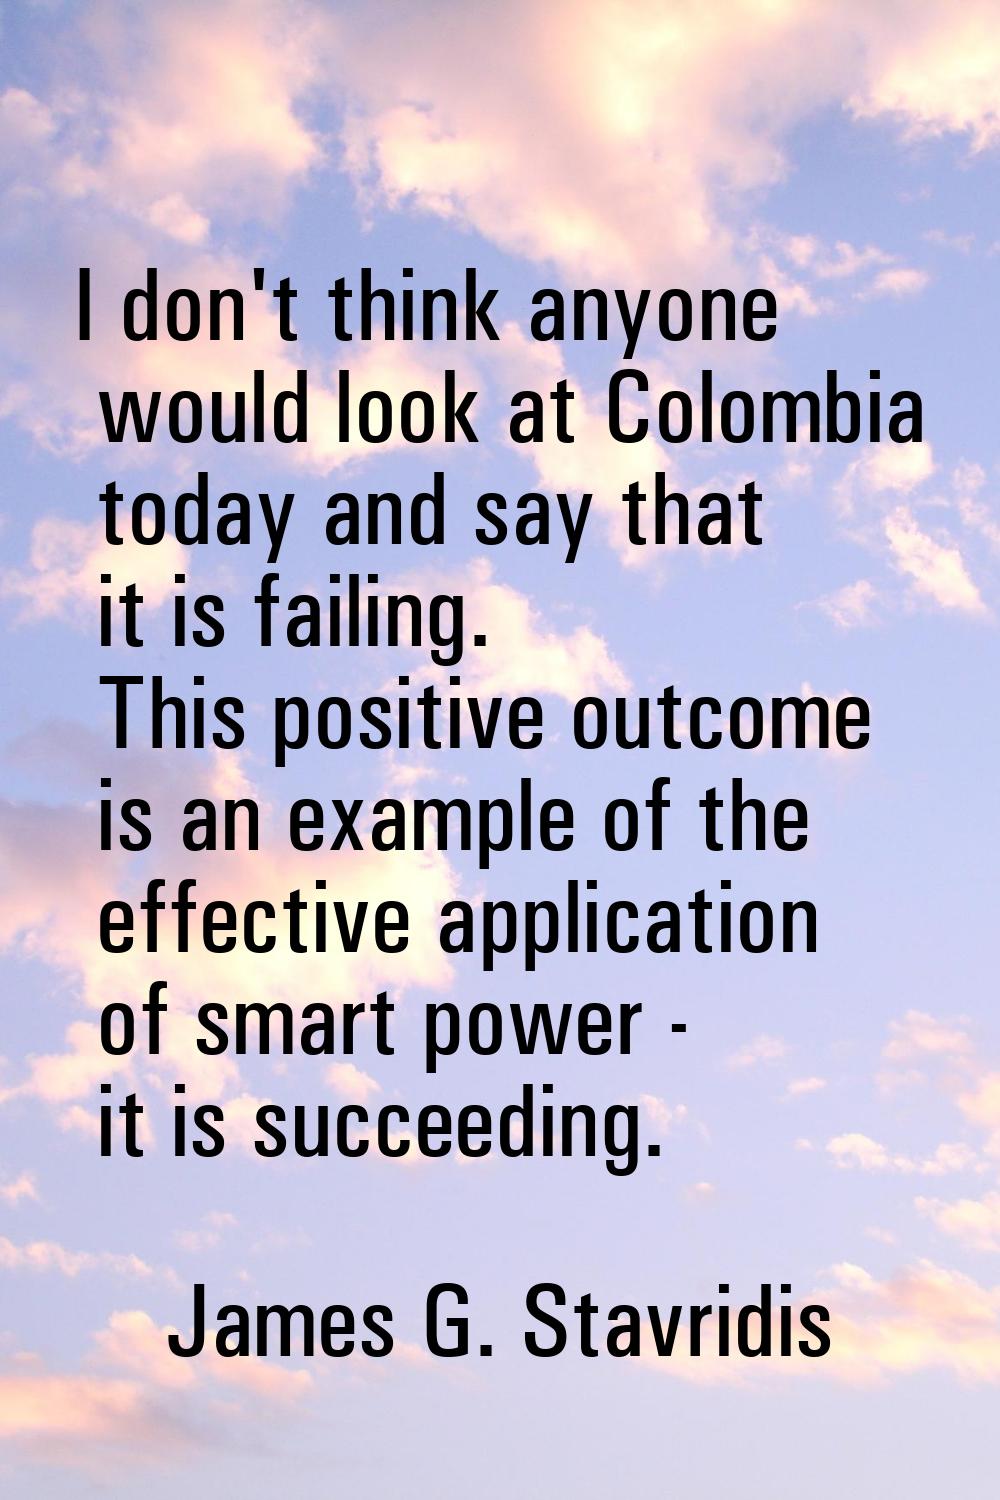 I don't think anyone would look at Colombia today and say that it is failing. This positive outcome